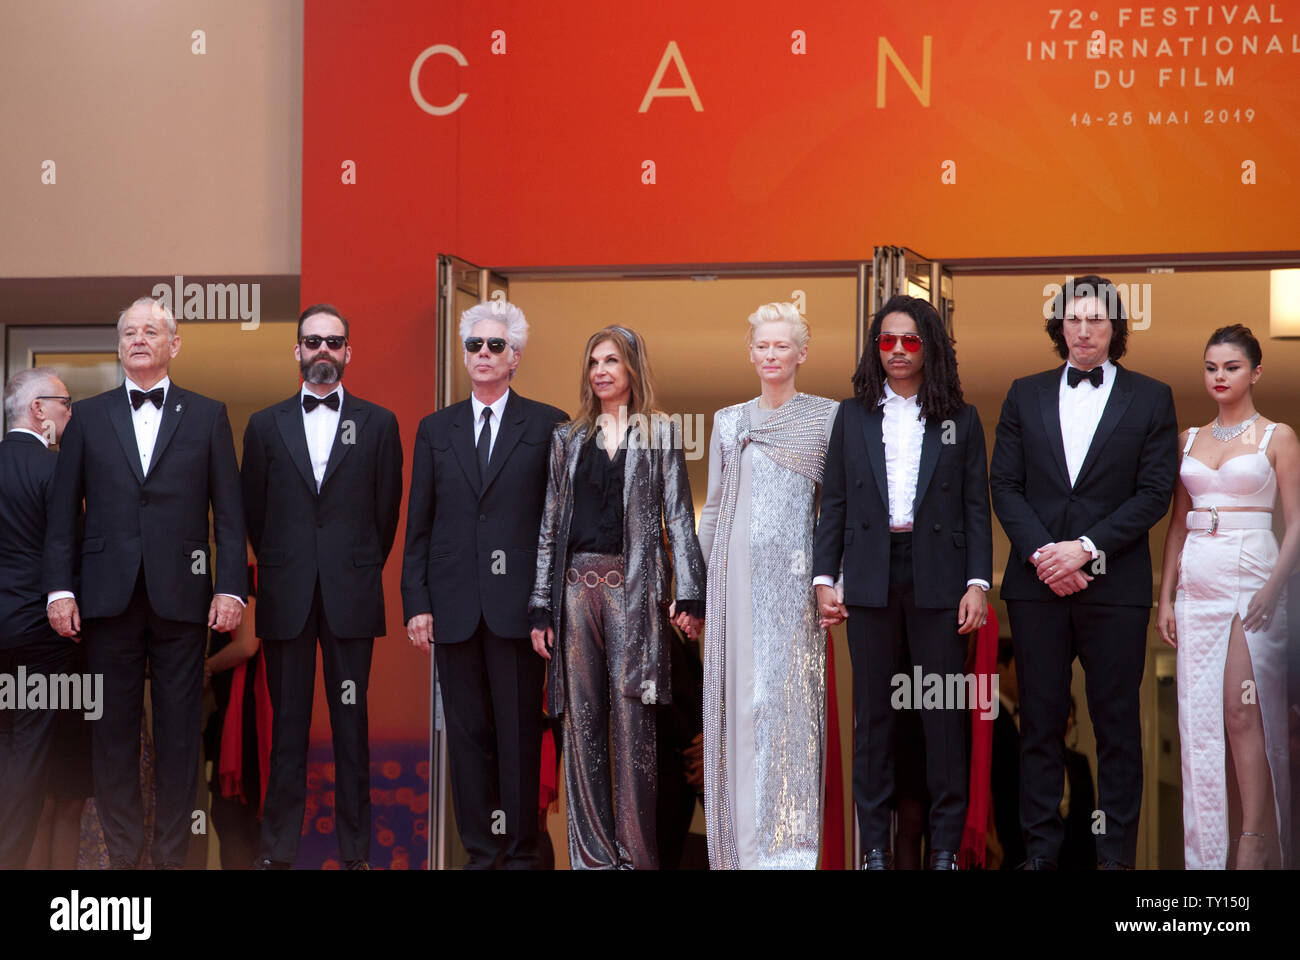 Bill Murray, Carter Logan, Tilda Swinton, Director Jim Jarmusch, Sara Driver,  Luka Sabbat, Adam Driver, Selena Gomez, at the Opening Ceremony and The Dead Don’t Die gala screening at the 72nd Cannes Film Festival Tuesday 14th May 2019, Cannes, France. Photo credit: Doreen Kennedy Stock Photo